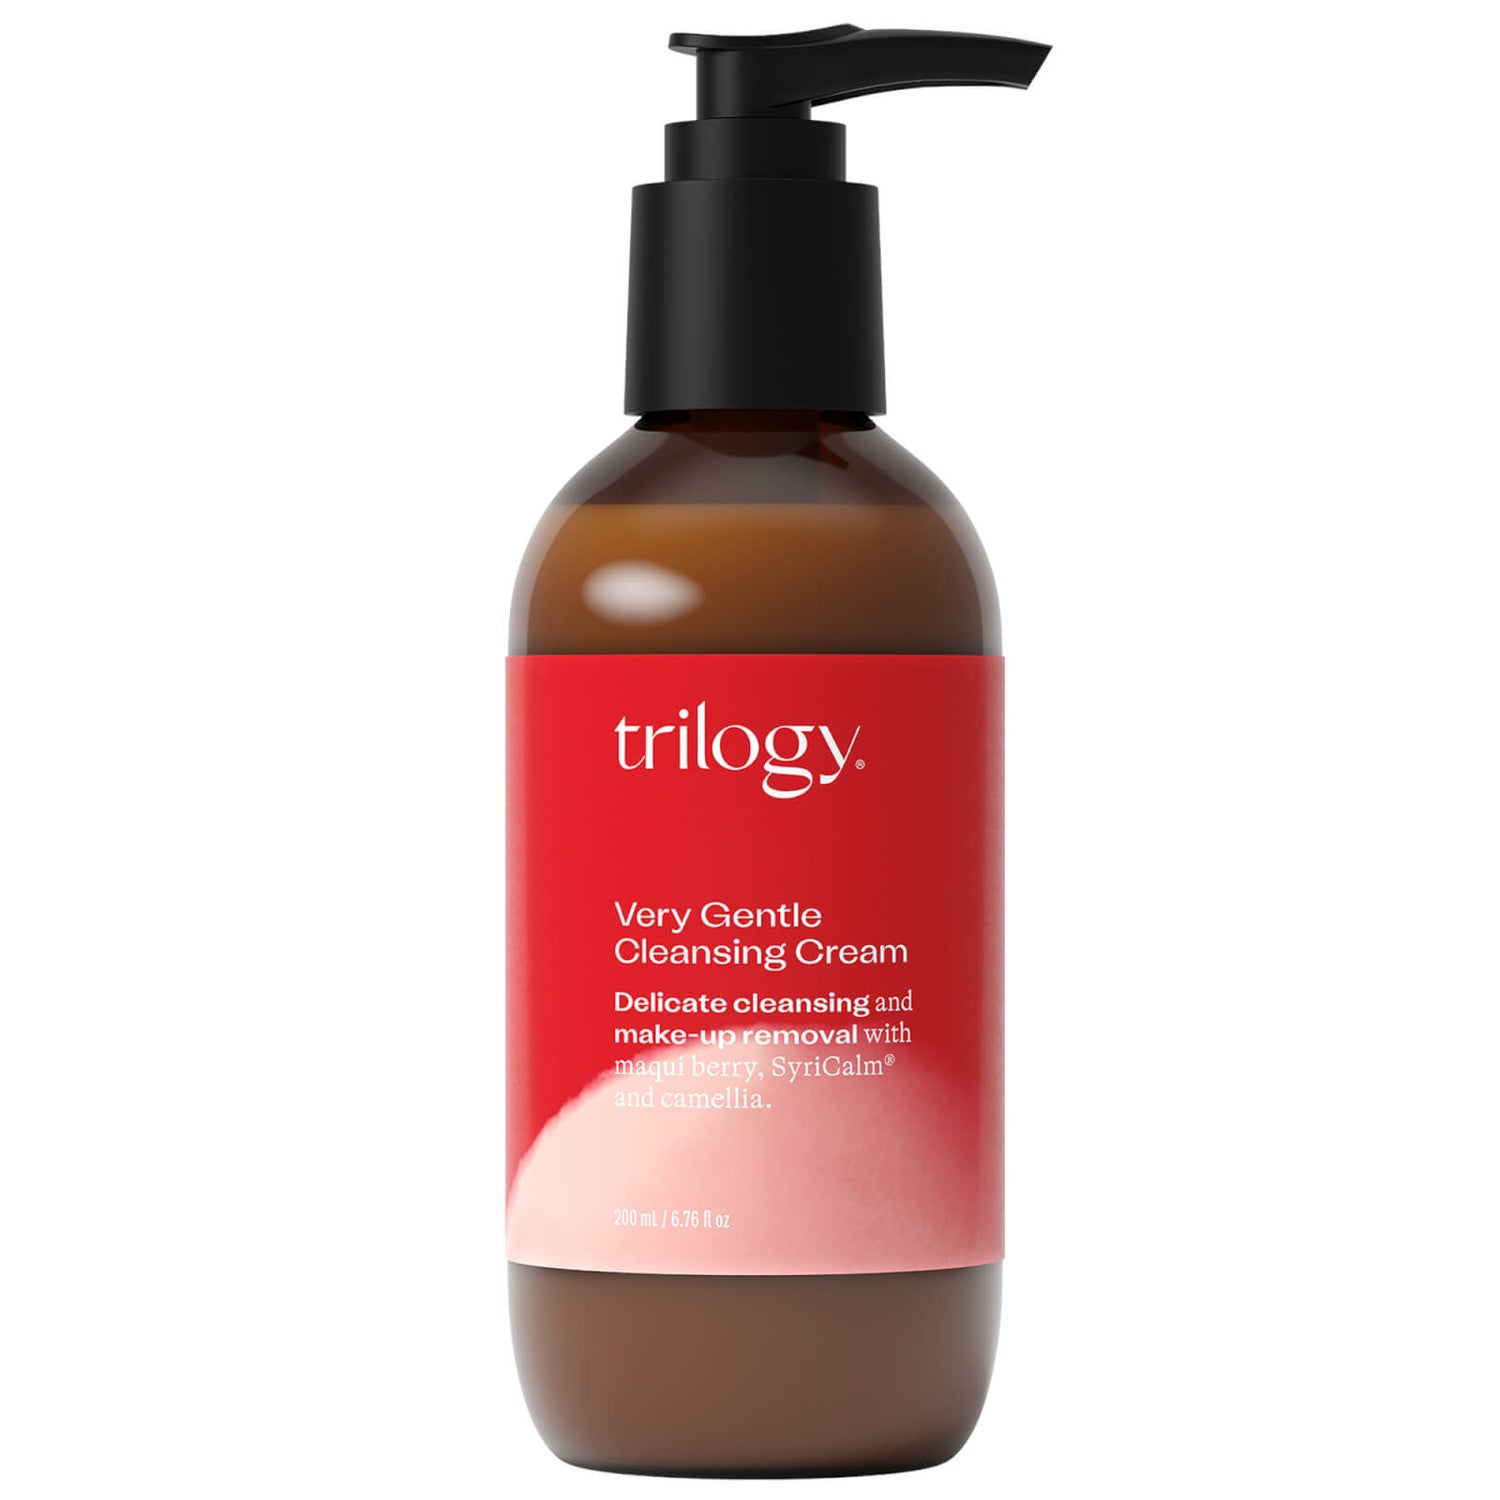 Trilogy Very Gentle Cleansing Cream (200 ml)